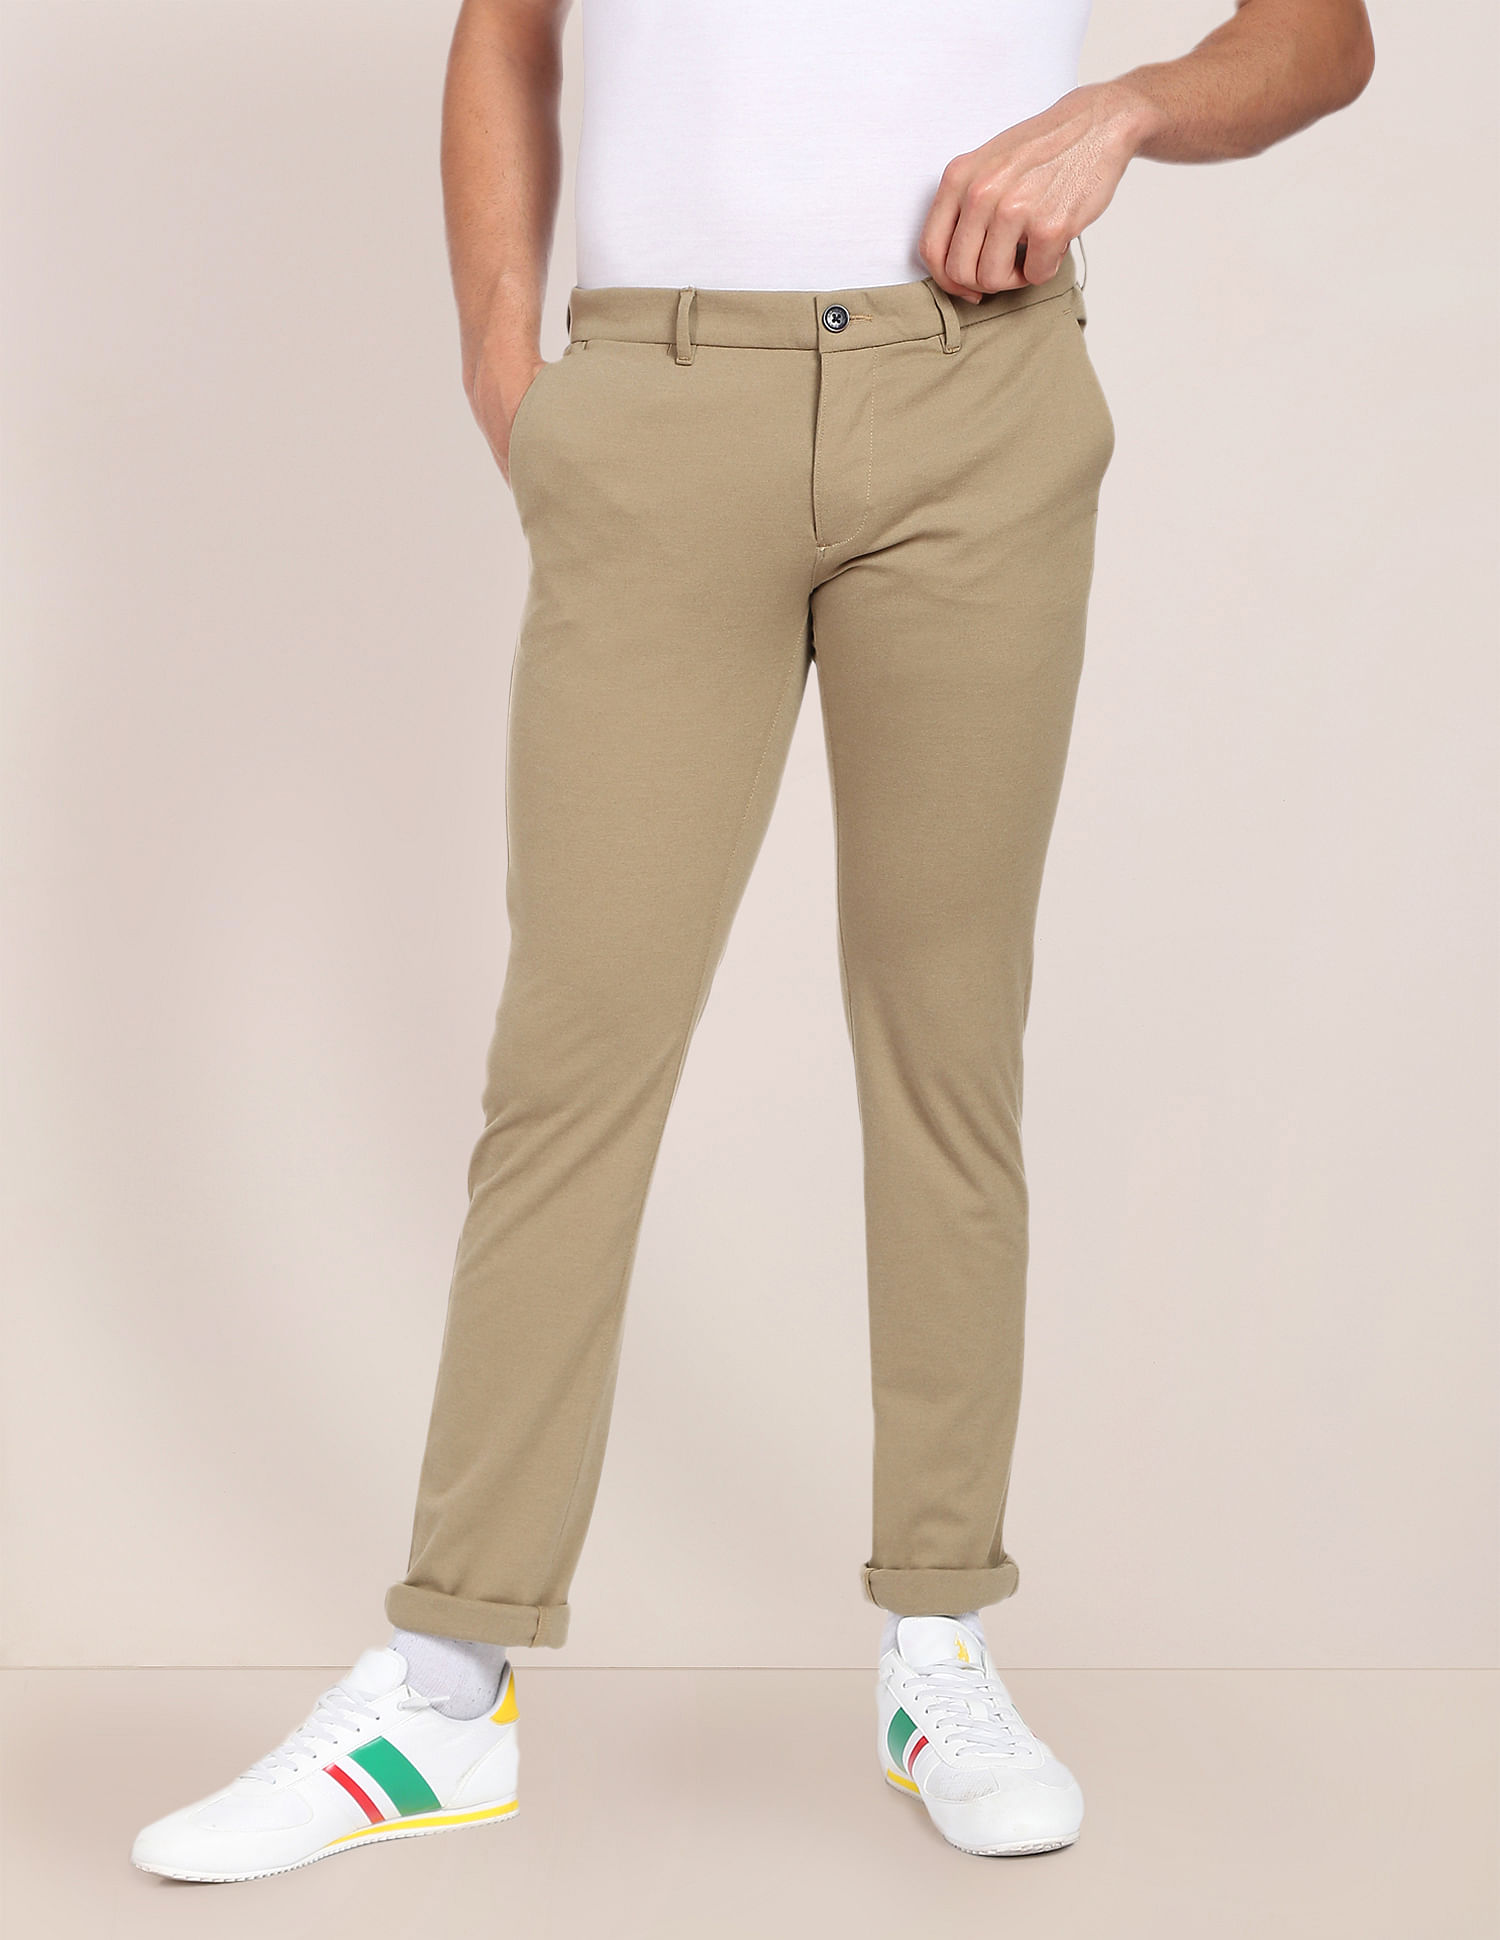 U S Polo Assn US Polo Assn Men Navy Blue Super Slim Fit Solid Formal  Trousers for men price  Best buy price in India July 2023 detail  trends   PriceHunt